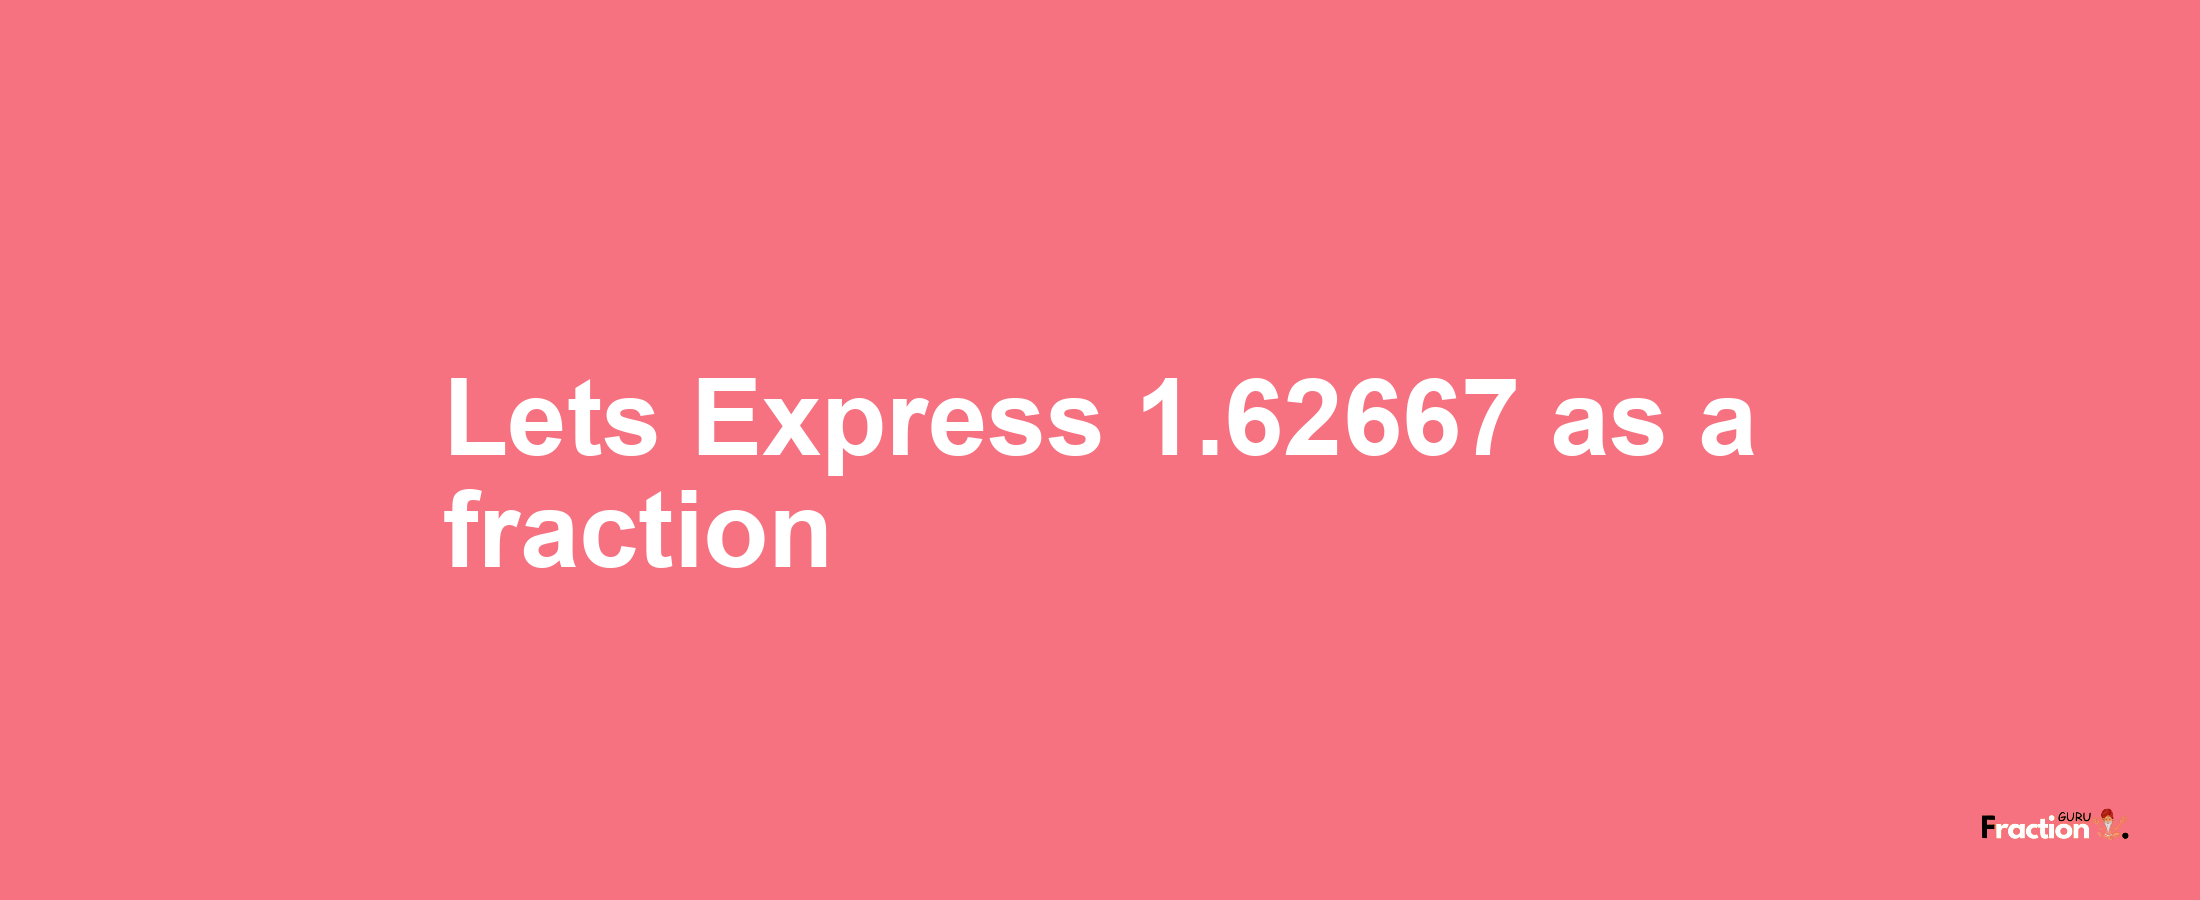 Lets Express 1.62667 as afraction